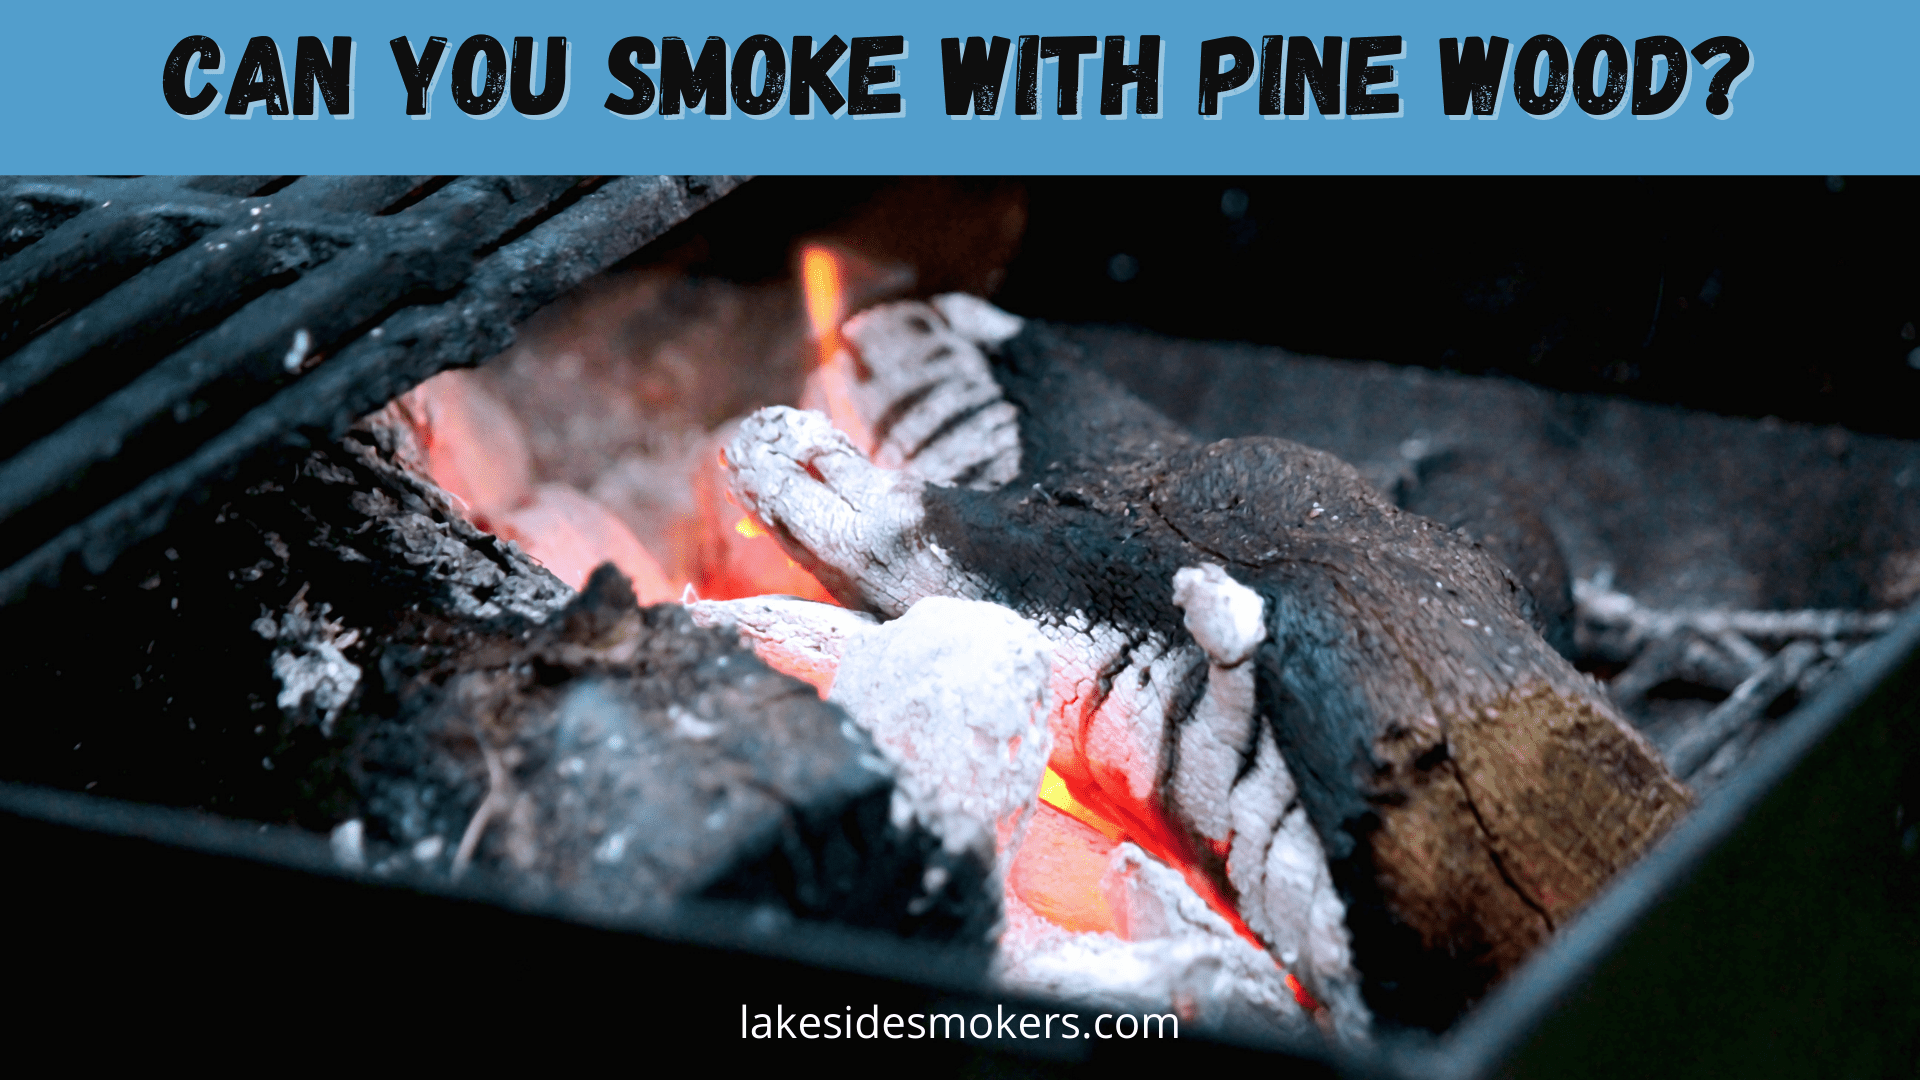 Can you smoke with pine wood? This is why it’s not a good idea